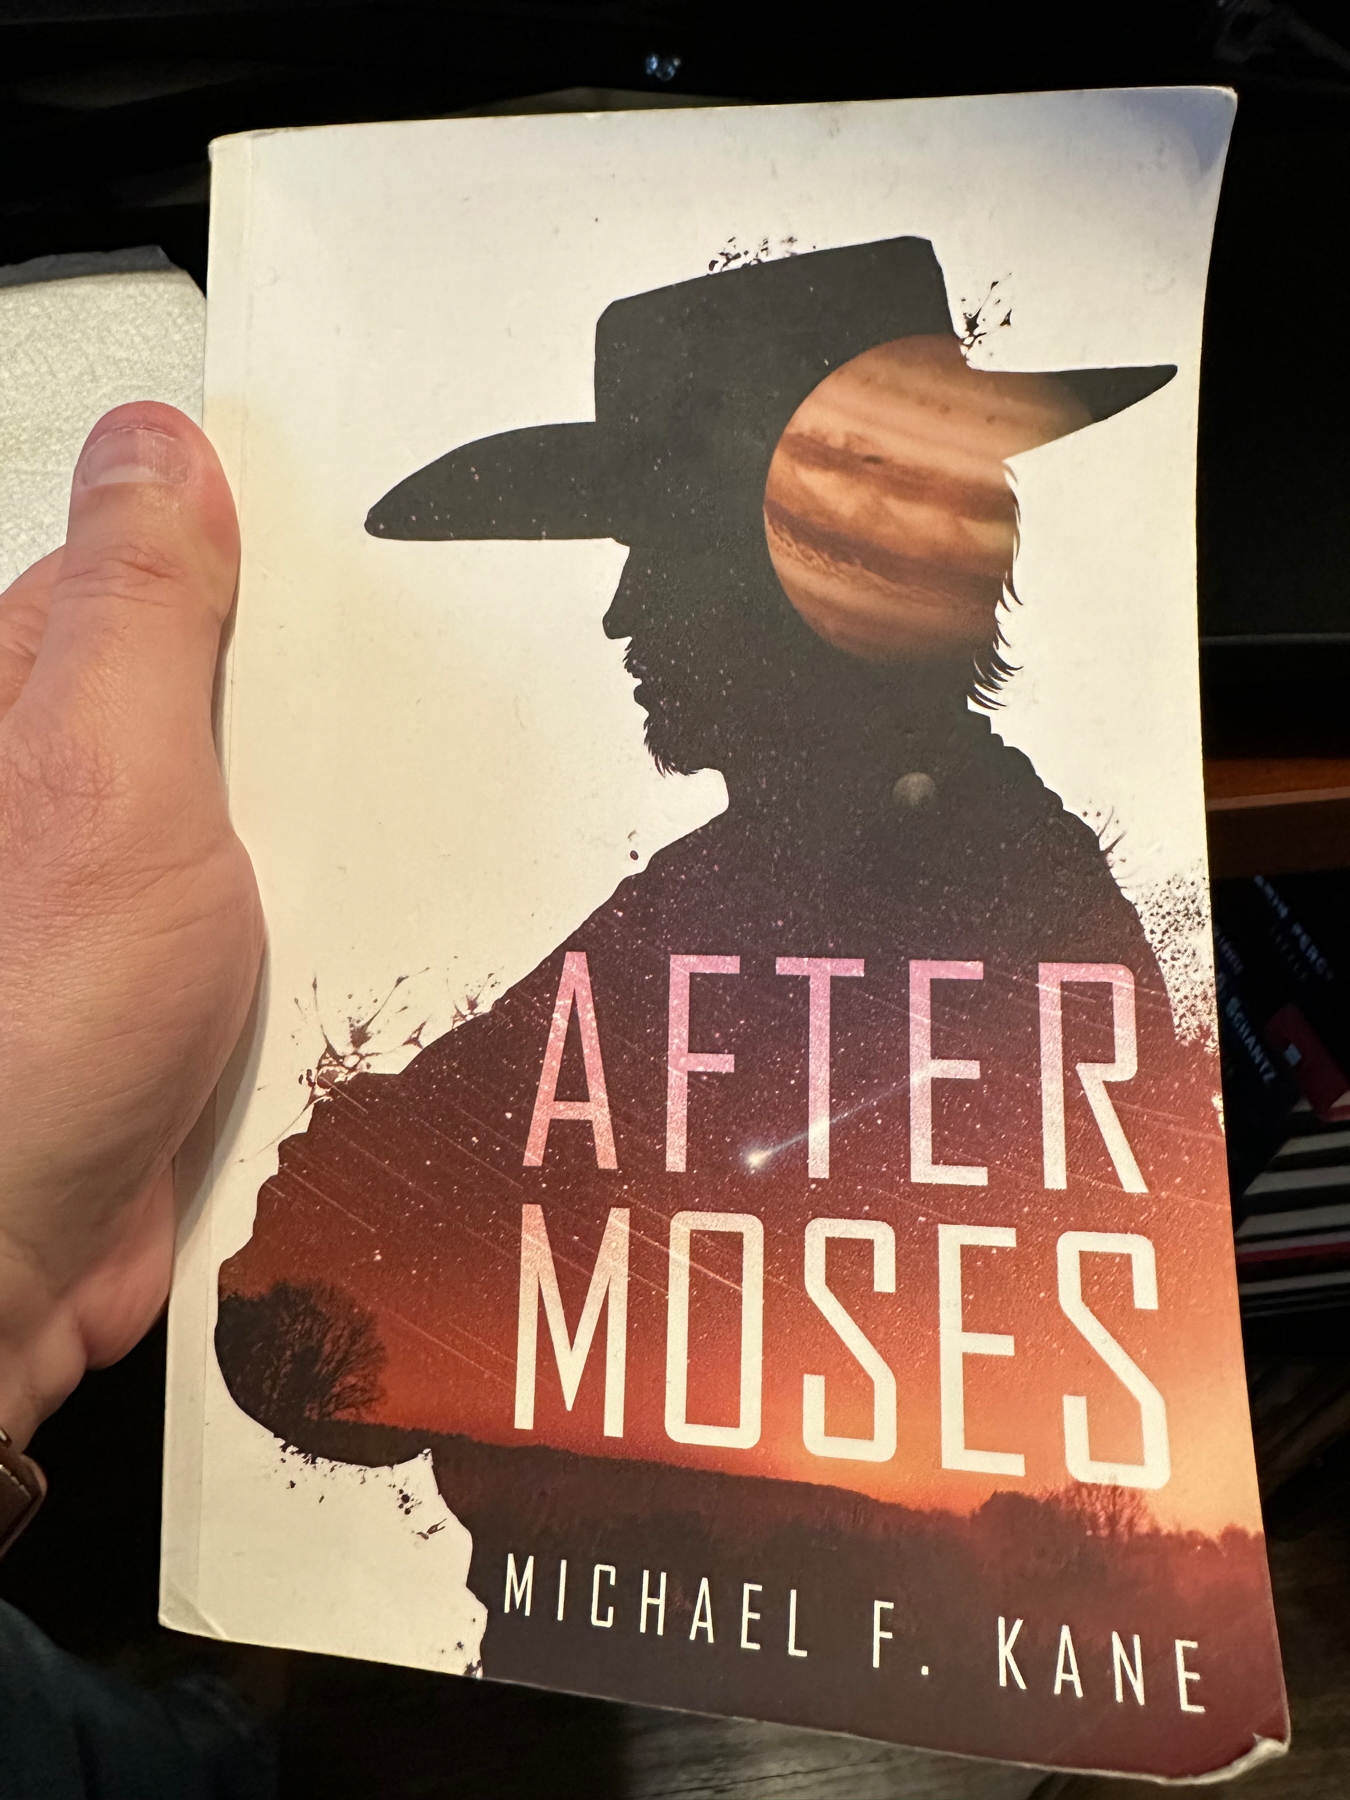 My paperback copy of Michael Kane's book After Moses